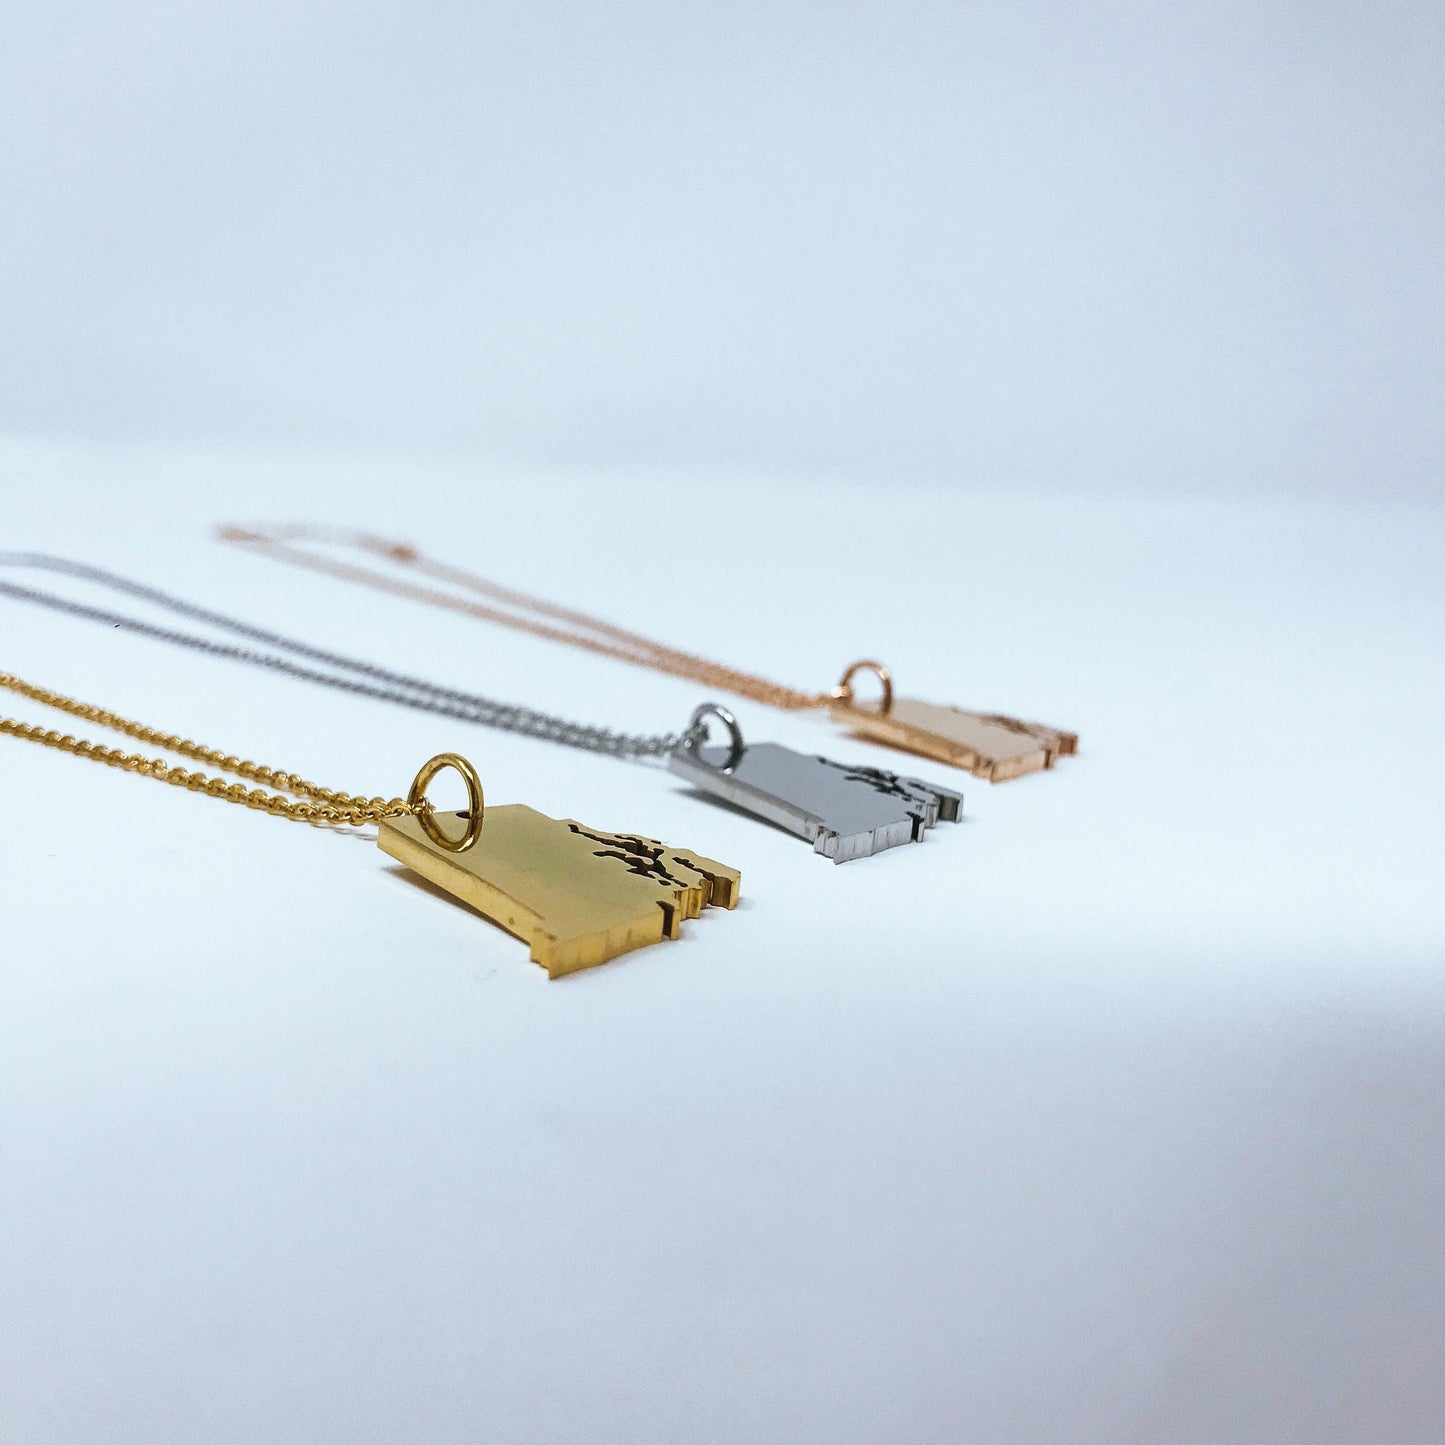 Rhode Island State Silhouette Necklaces in 3 different colors: Gold, Silver & Rose Gold